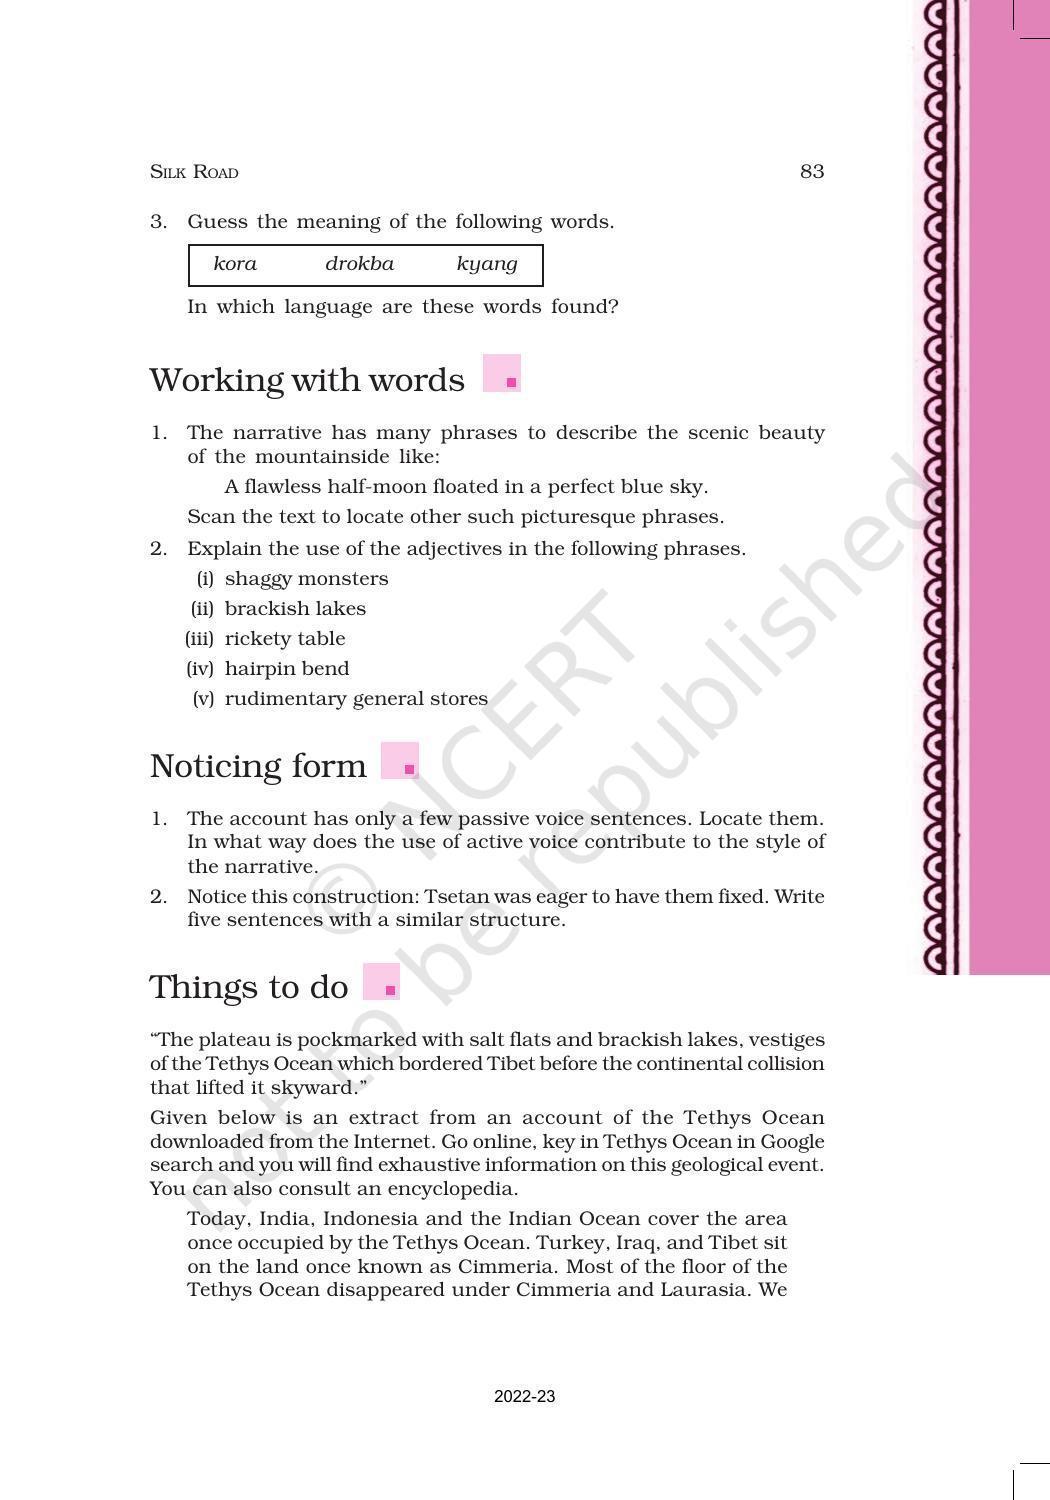 NCERT Book for Class 11 English Hornbill Chapter 8 Silk Road - Page 10